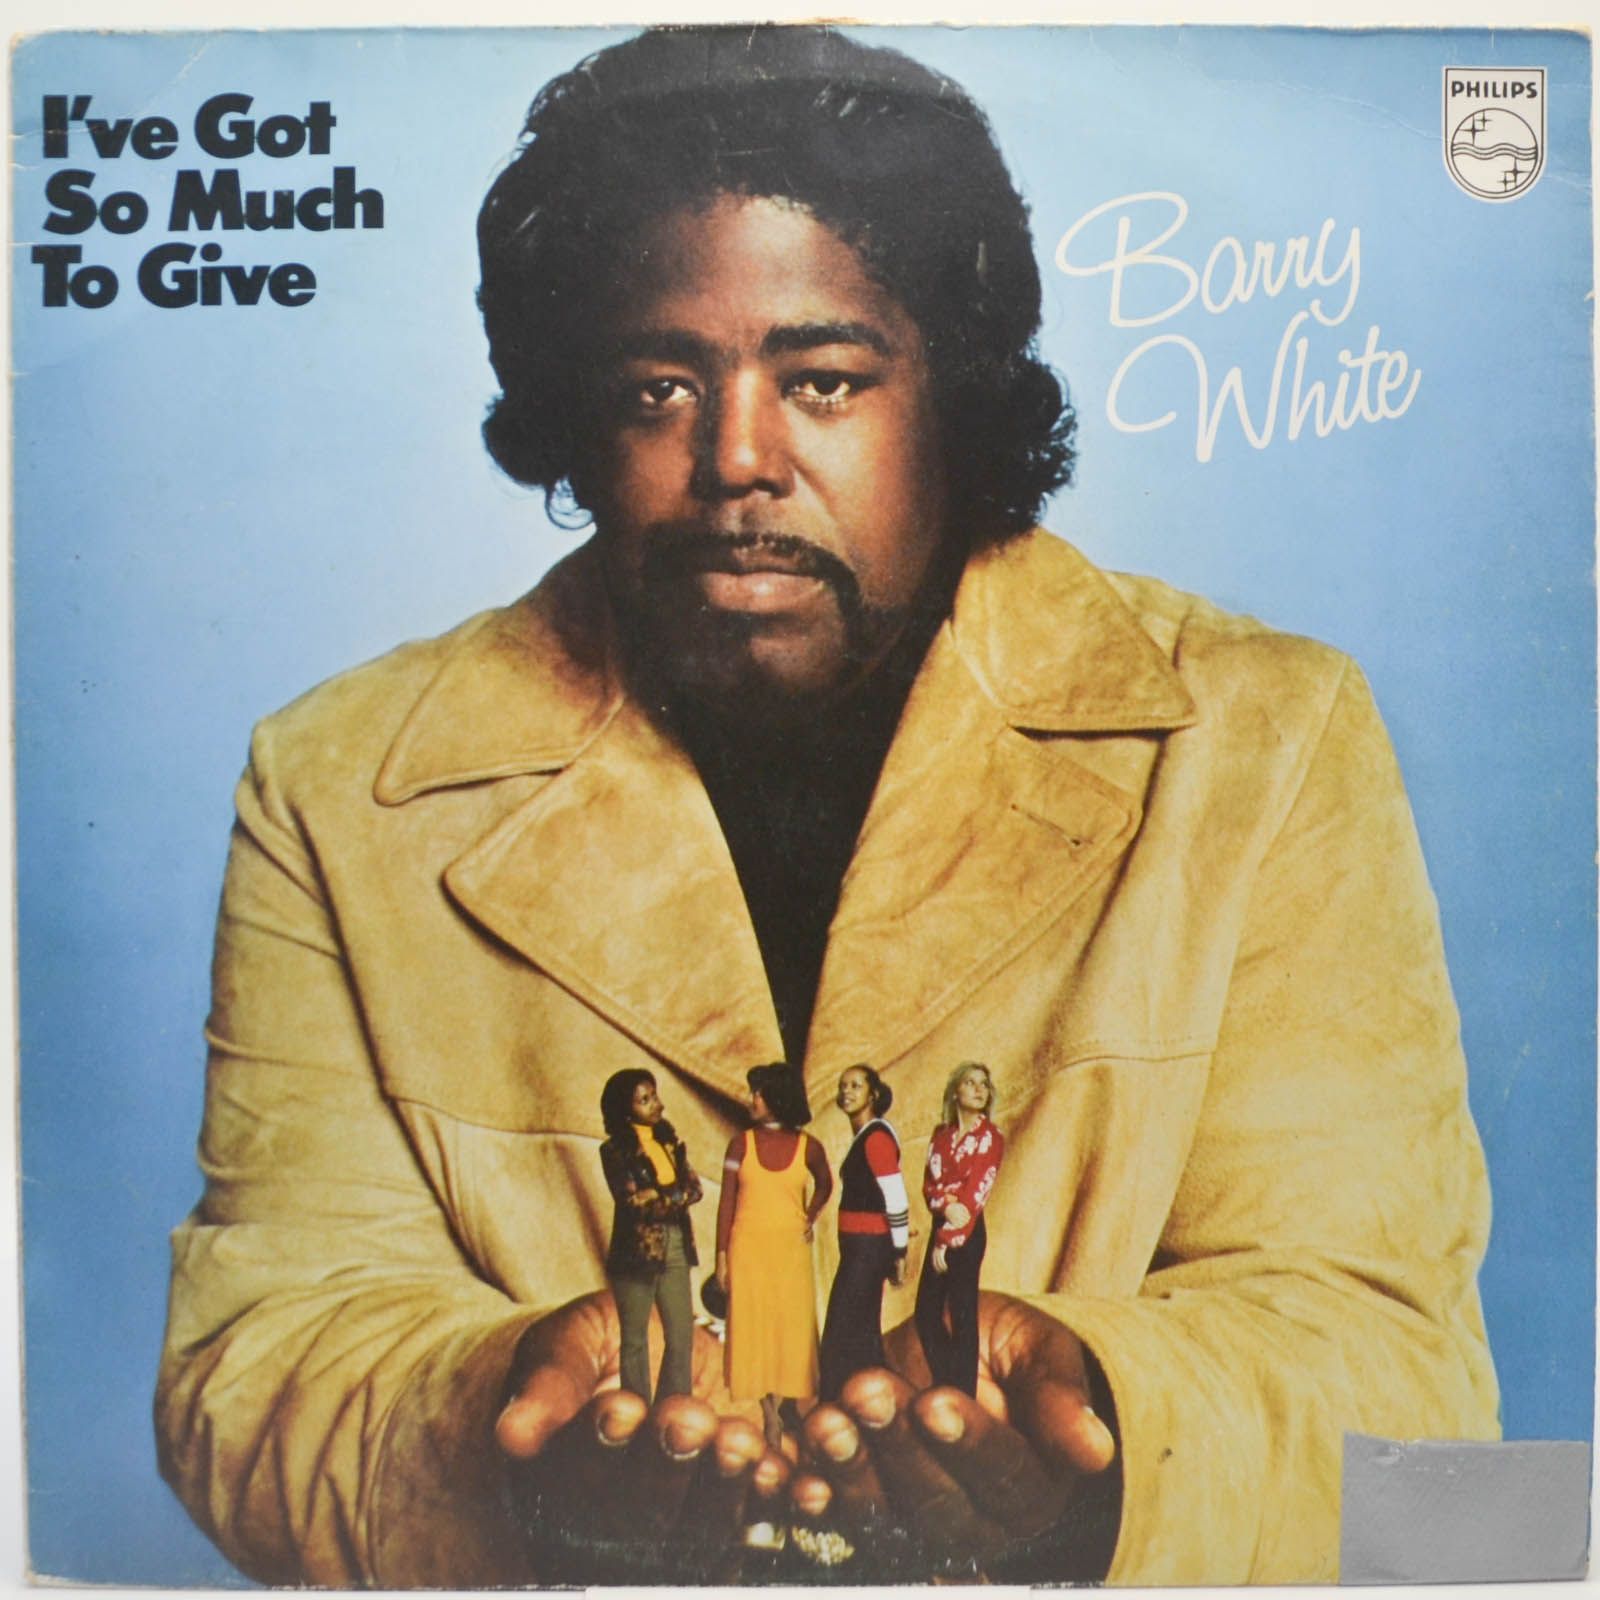 Barry White — I've Got So Much To Give, 1973